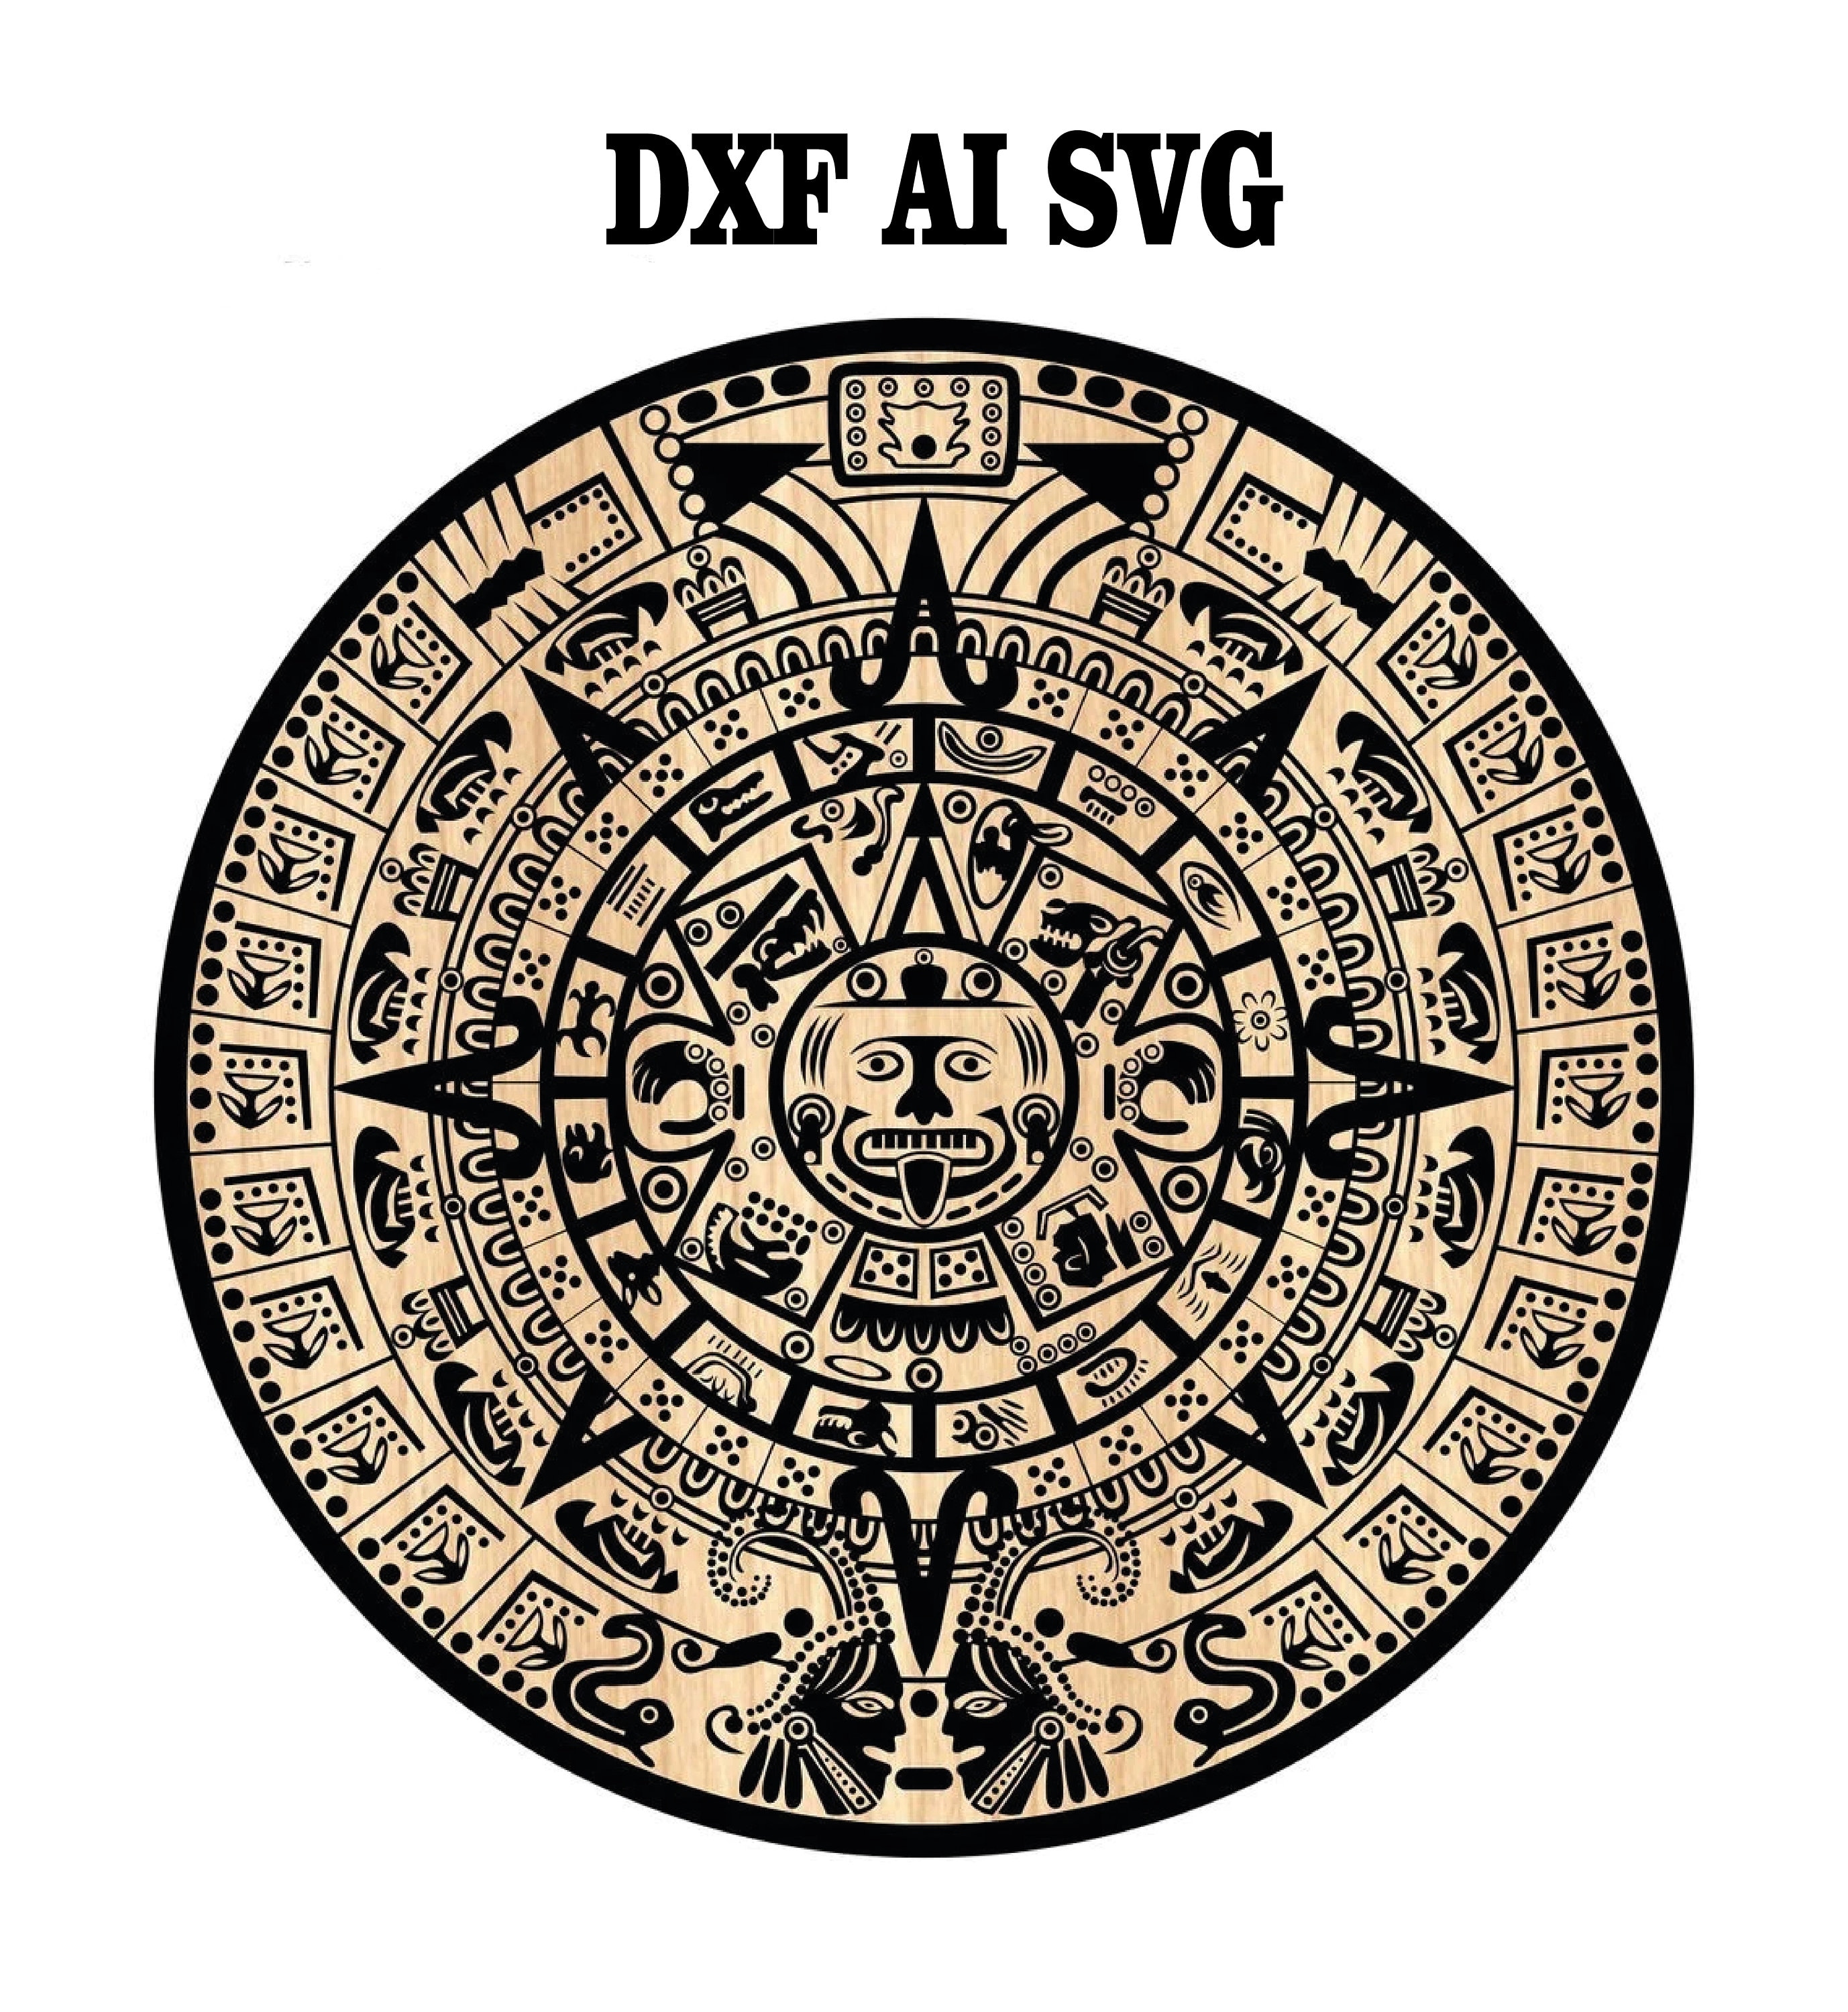 Mayan Calendar DXF SVG AI Vector Perfect for Laser Engraving. Etsy